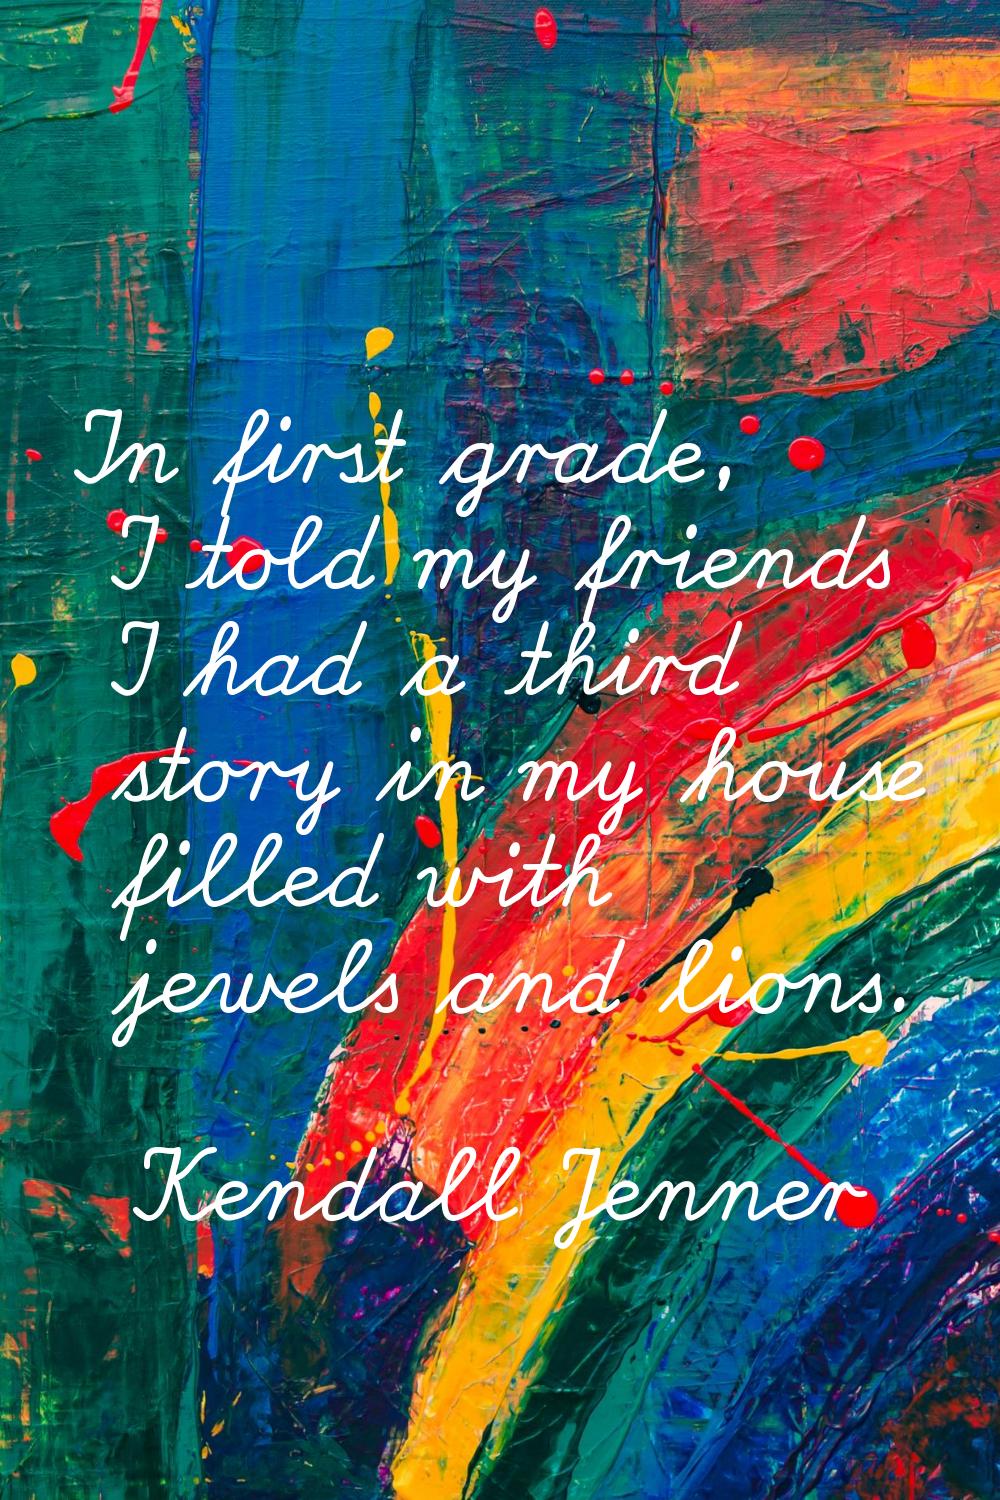 In first grade, I told my friends I had a third story in my house filled with jewels and lions.